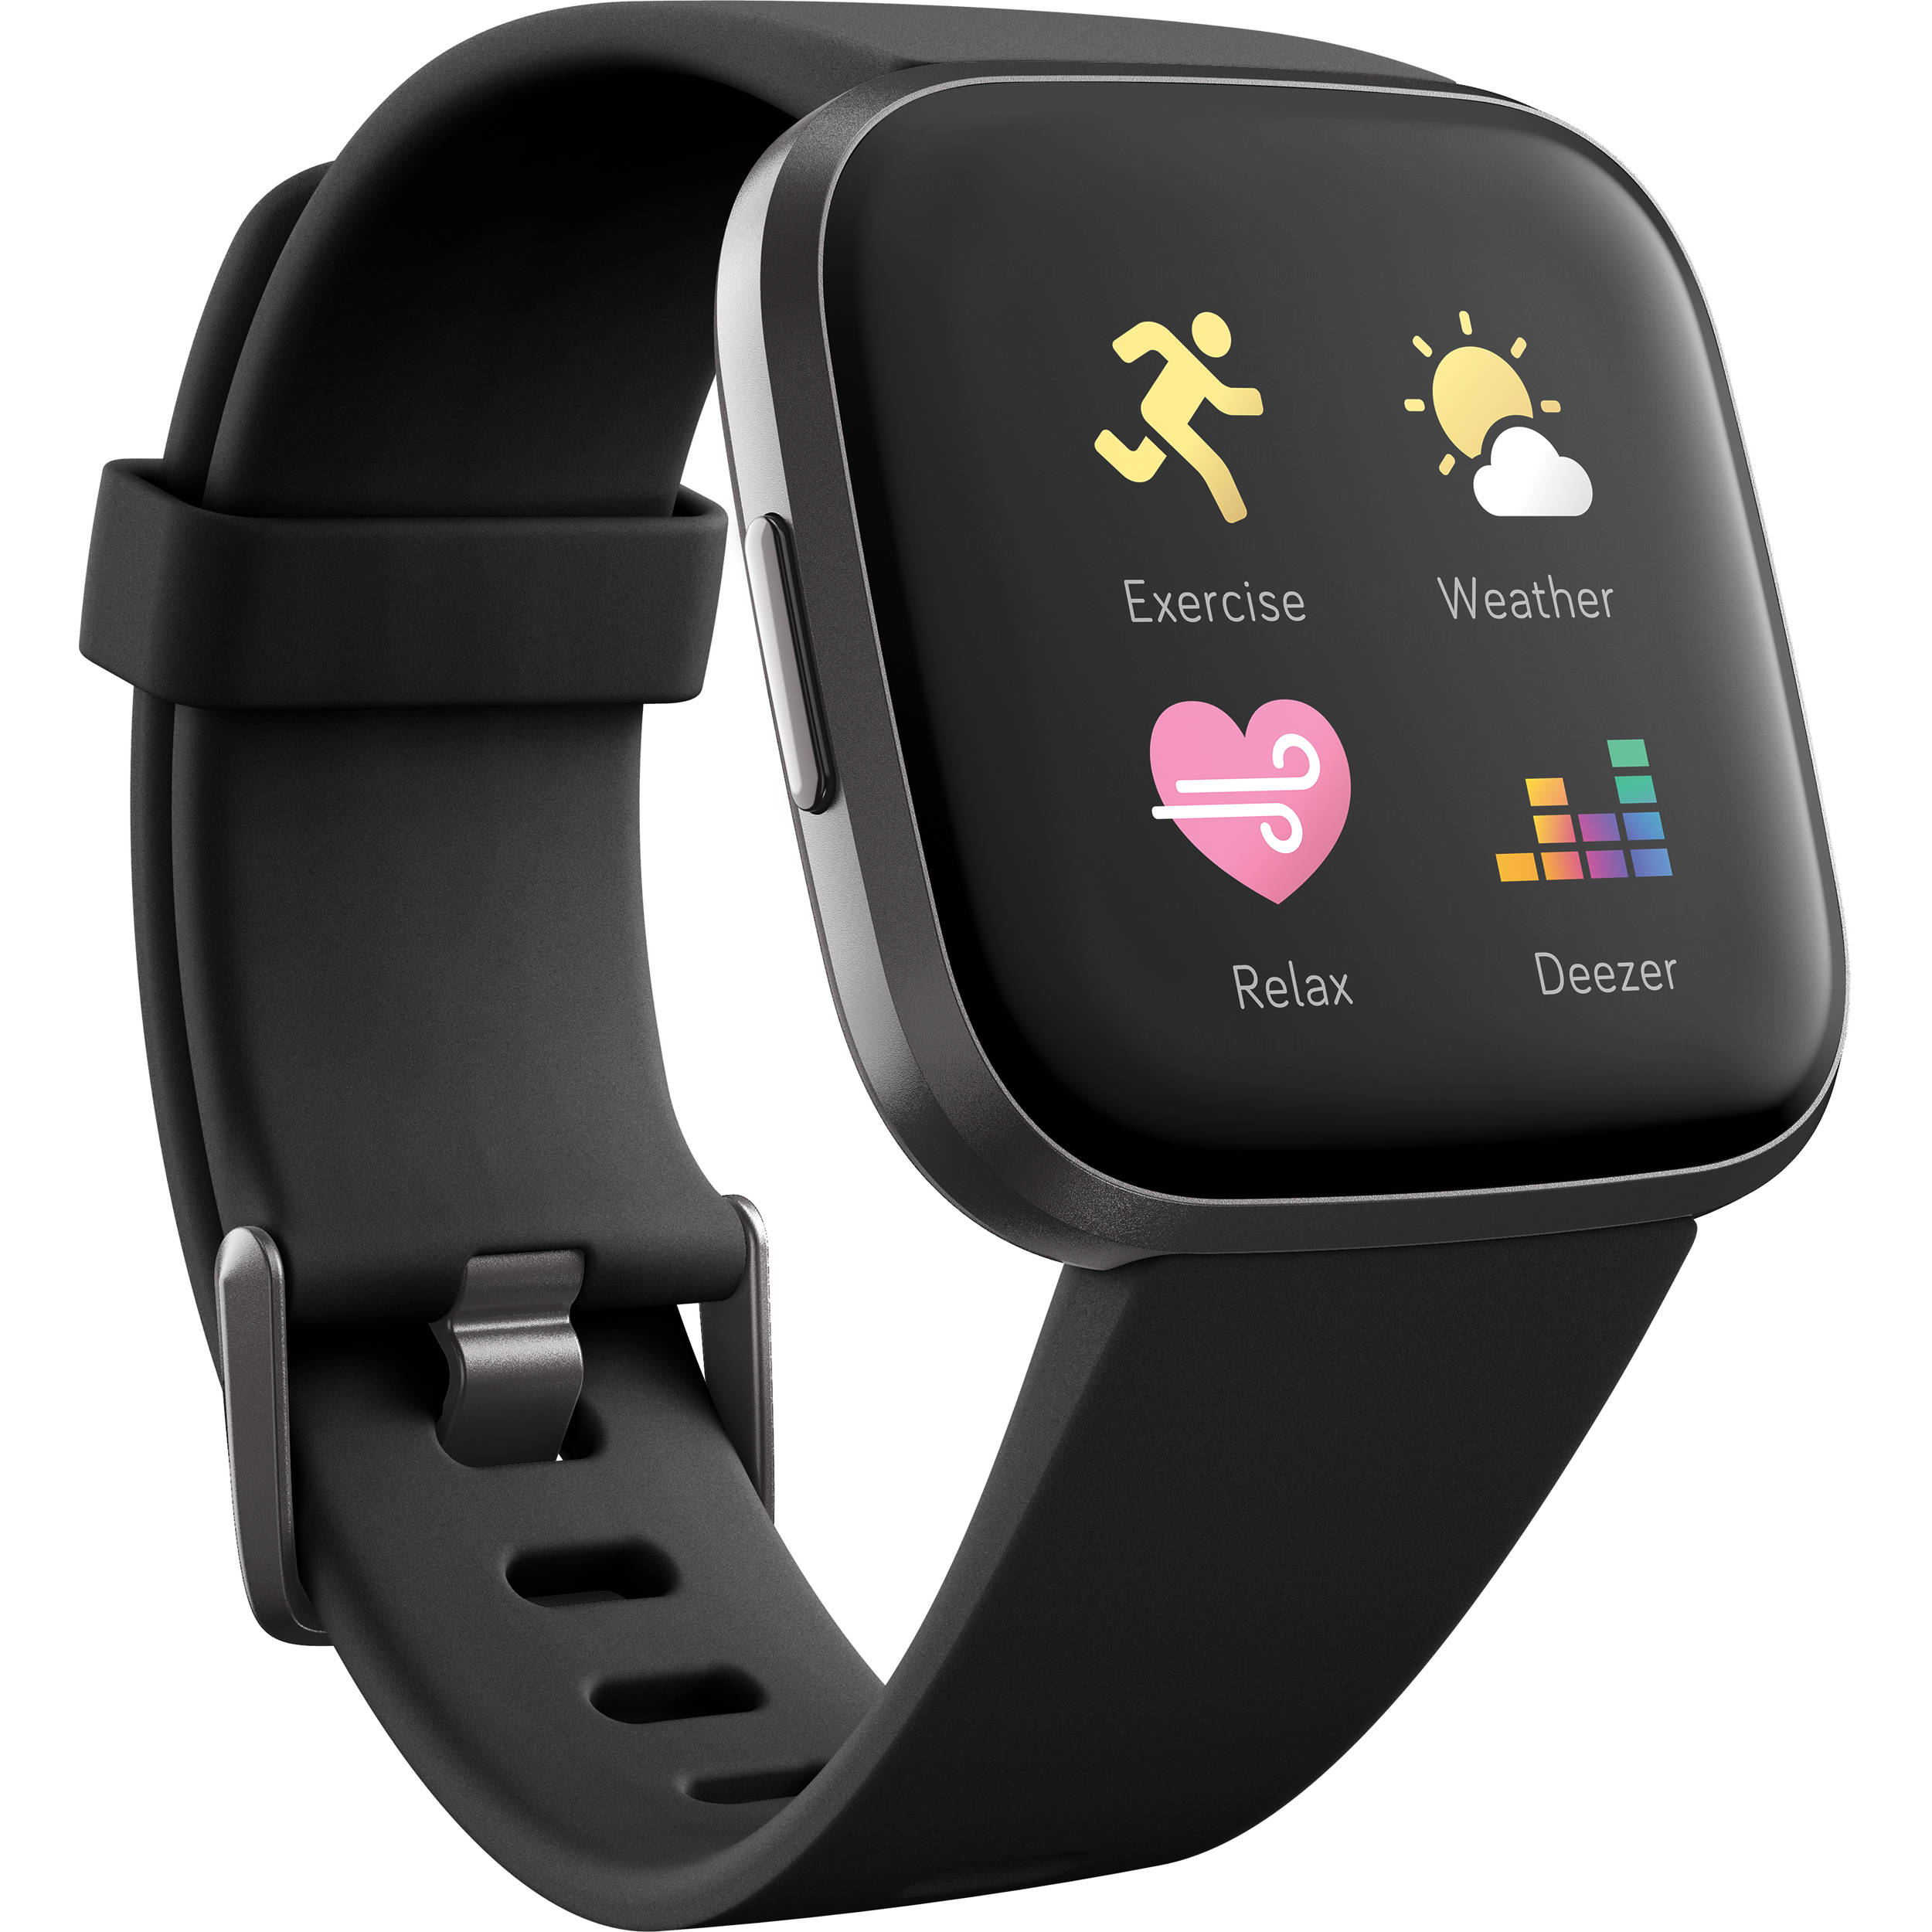 Fitbit Versa 2 Smart Watch with Heart Rate Monitor - Black / Carbon Aluminum (Certified Refurbished)